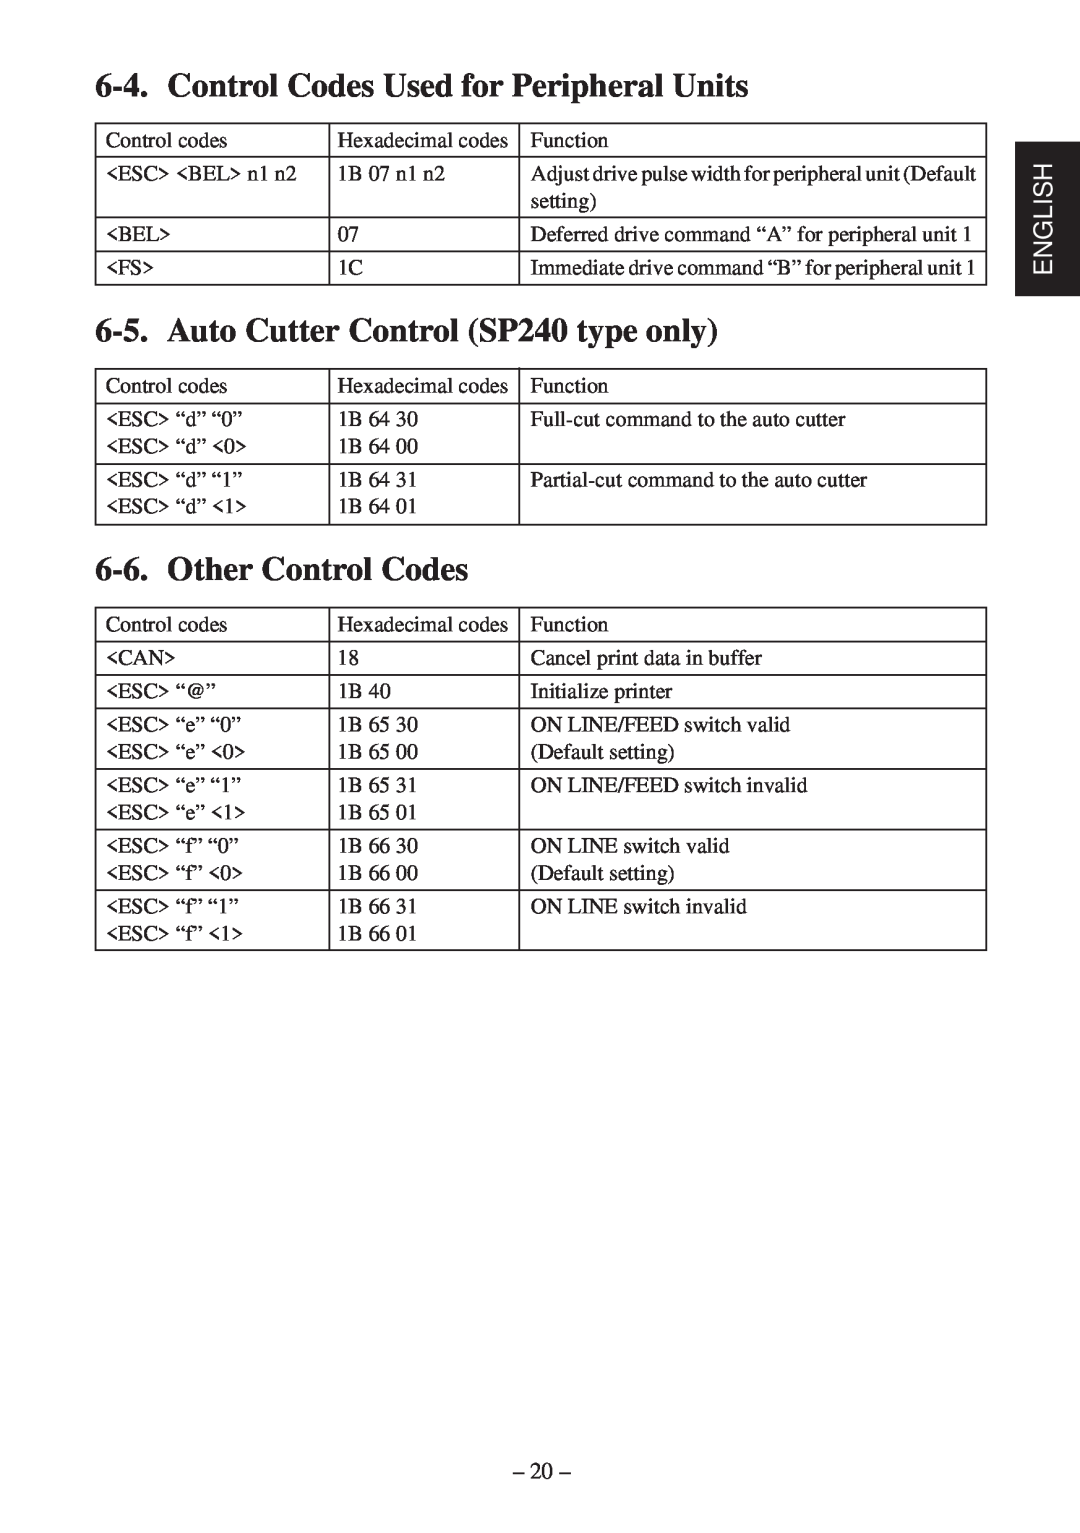 Star Micronics SP200F Control Codes Used for Peripheral Units, Auto Cutter Control SP240 type only, Other Control Codes 